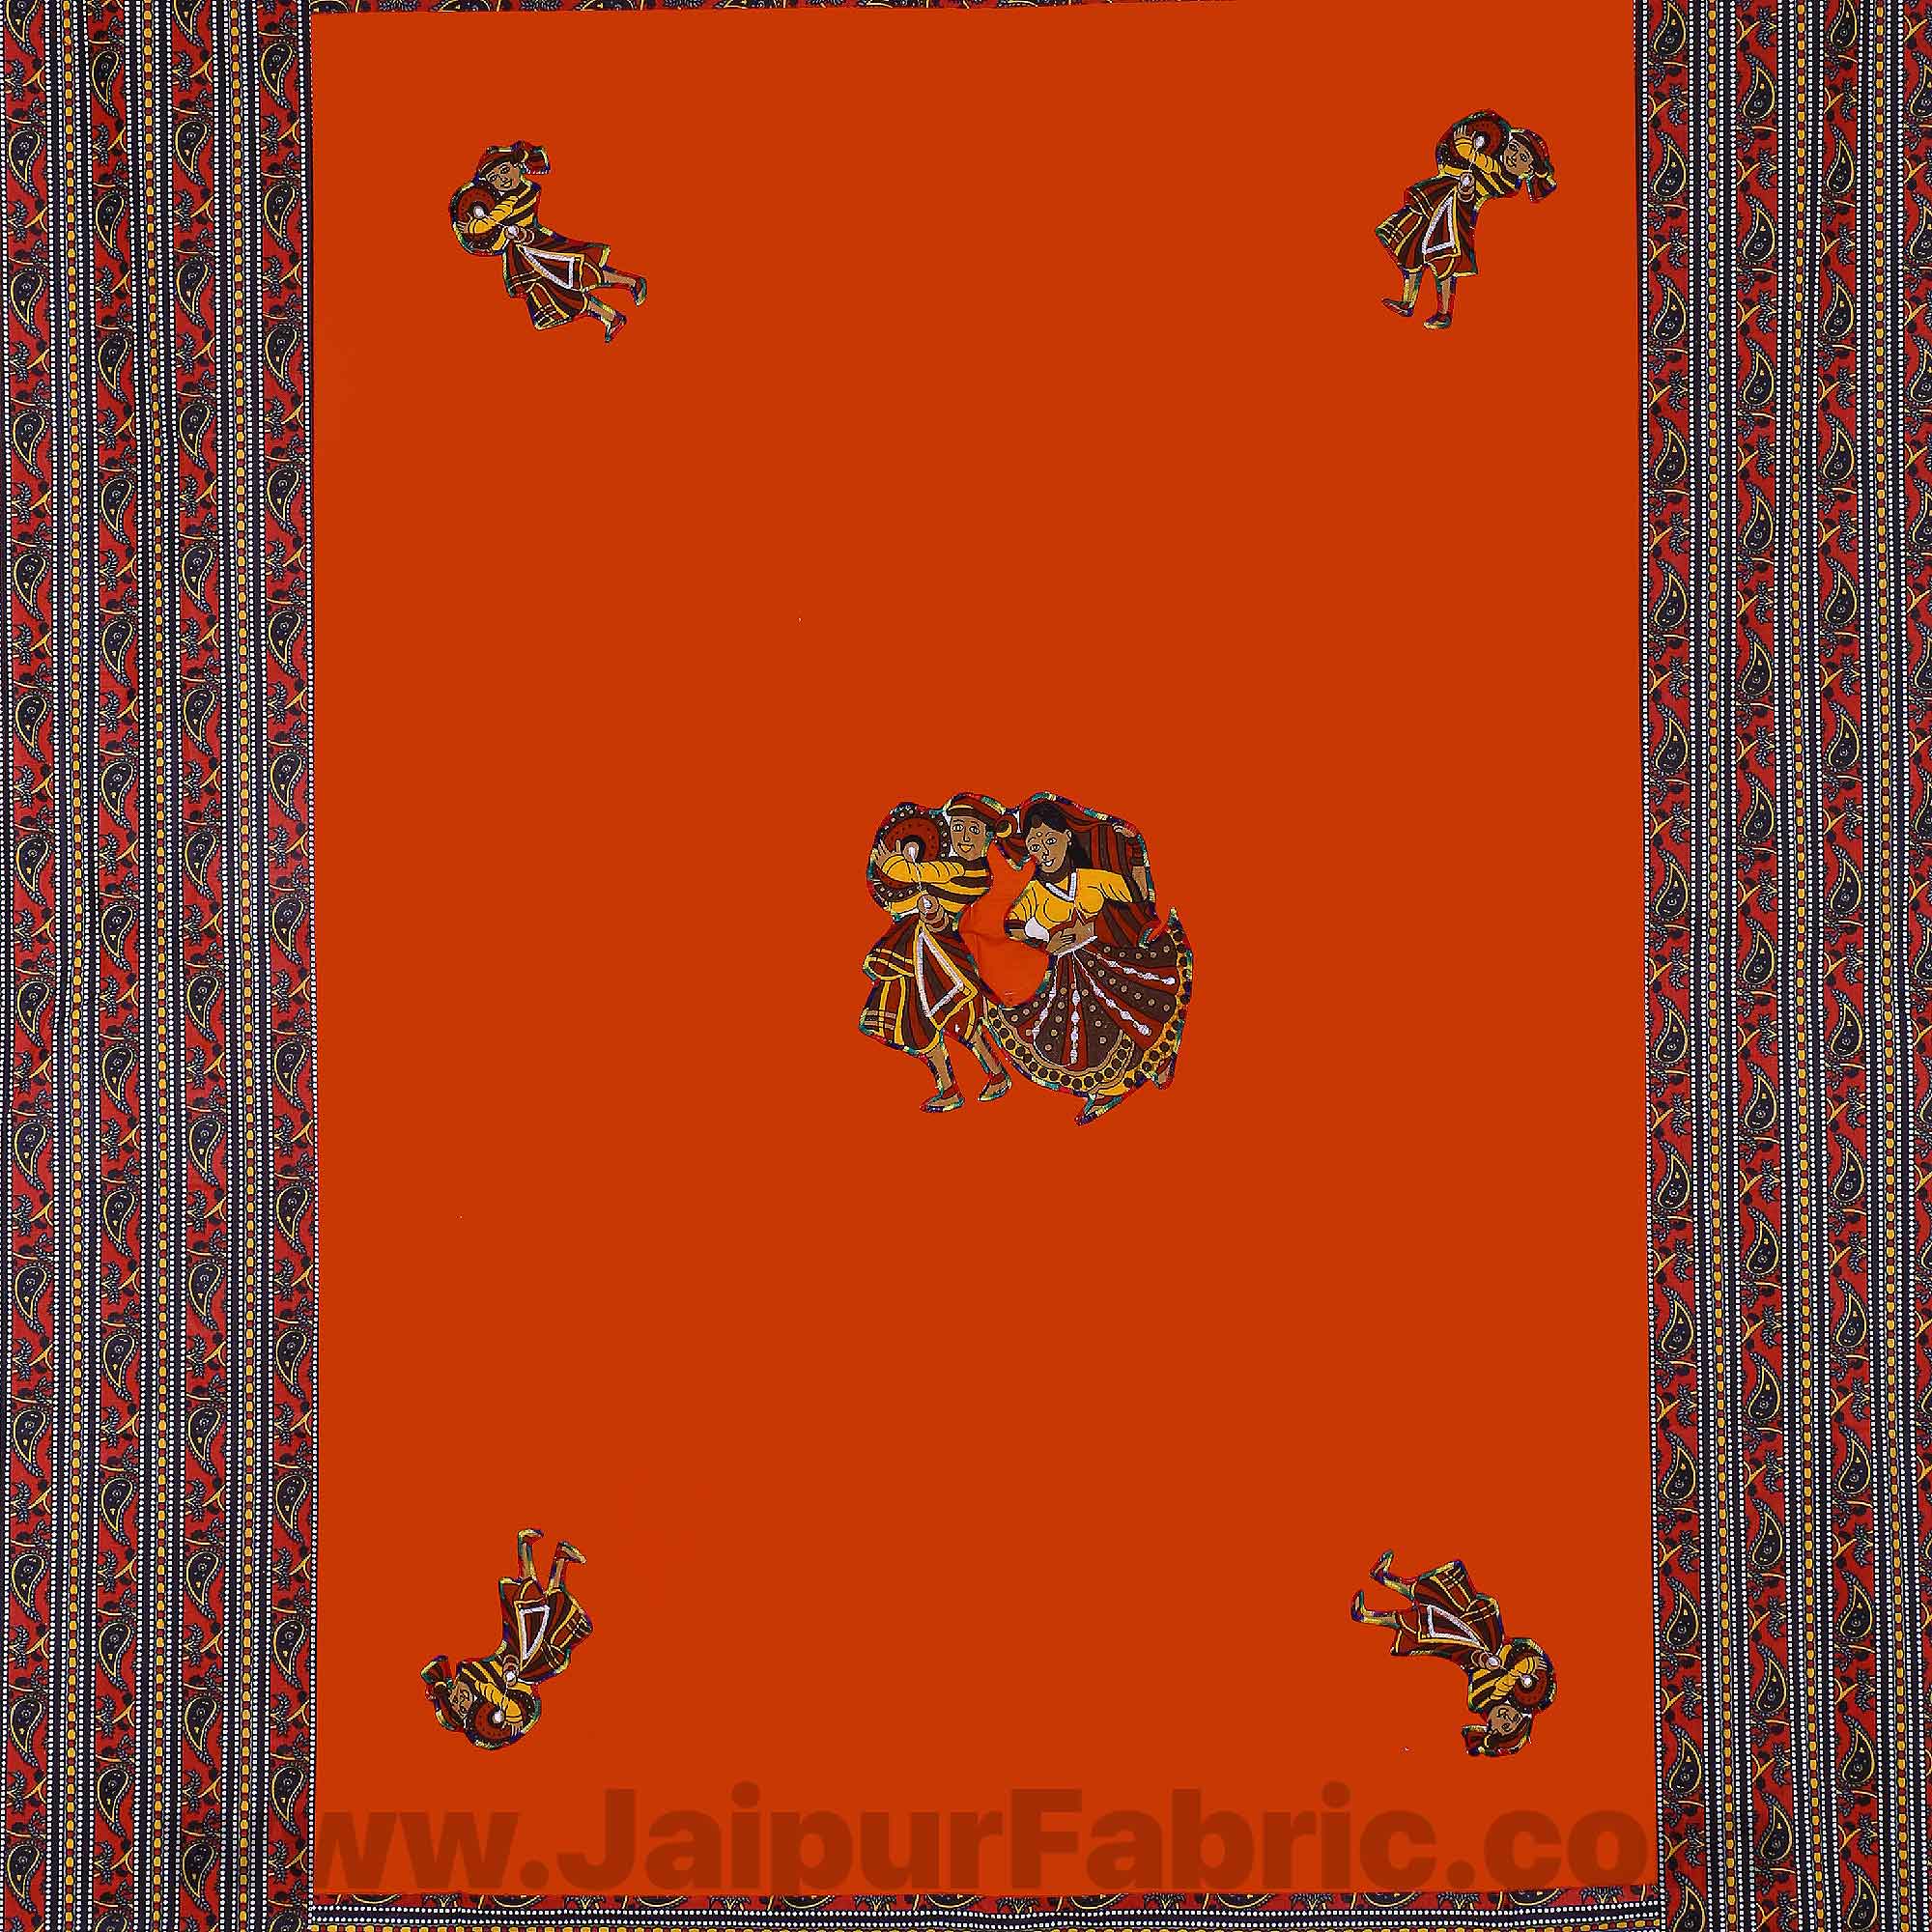 Applique Orange Chang Dance Jaipuri  Hand Made Embroidery Patch Work Single Bedsheet